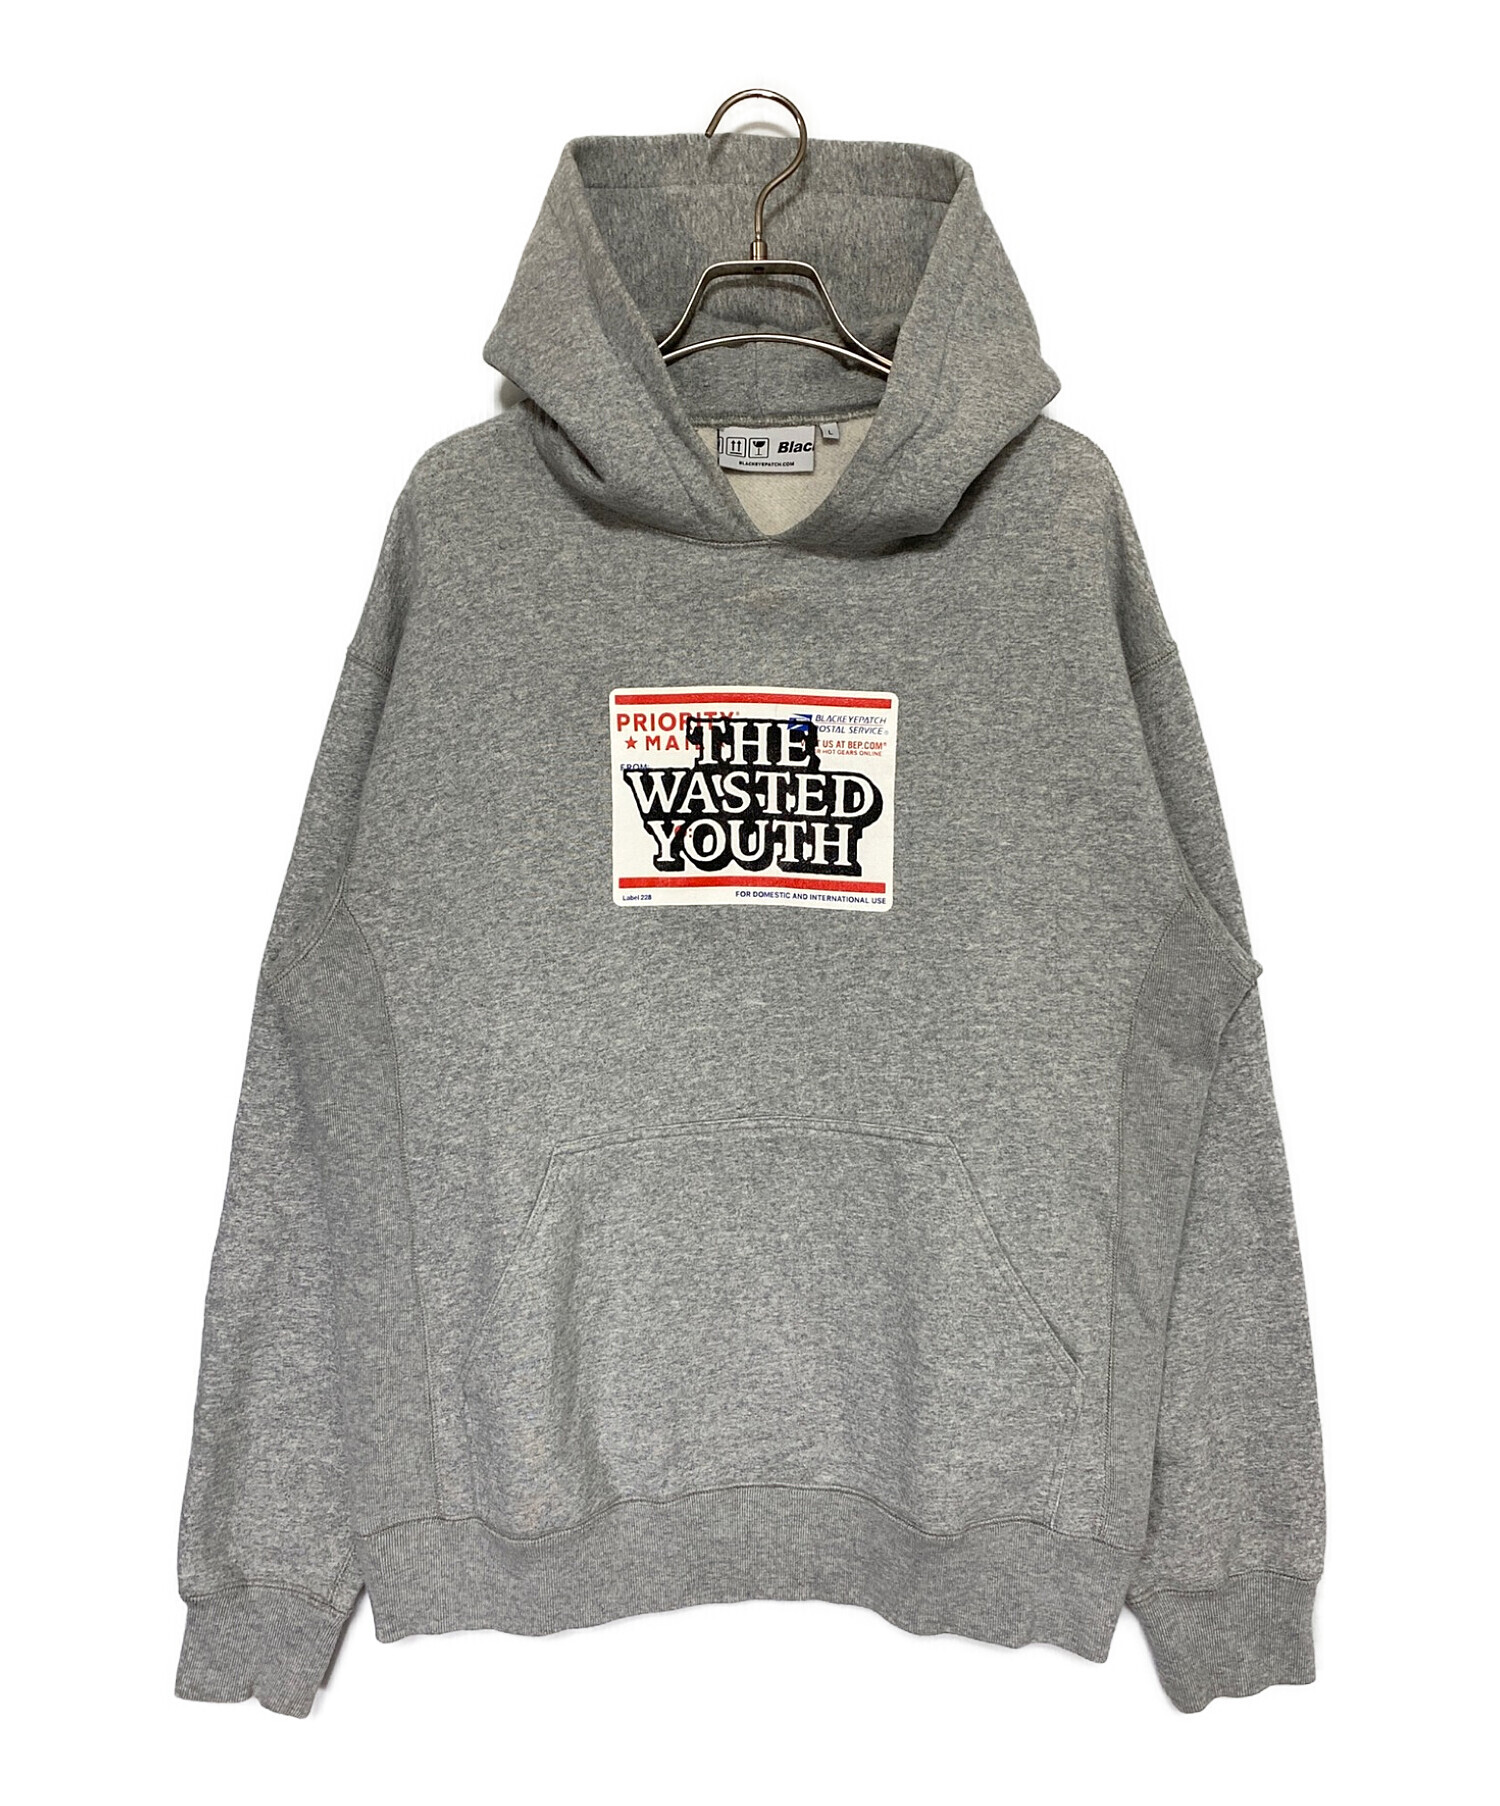 wasted youth   hoodie  L